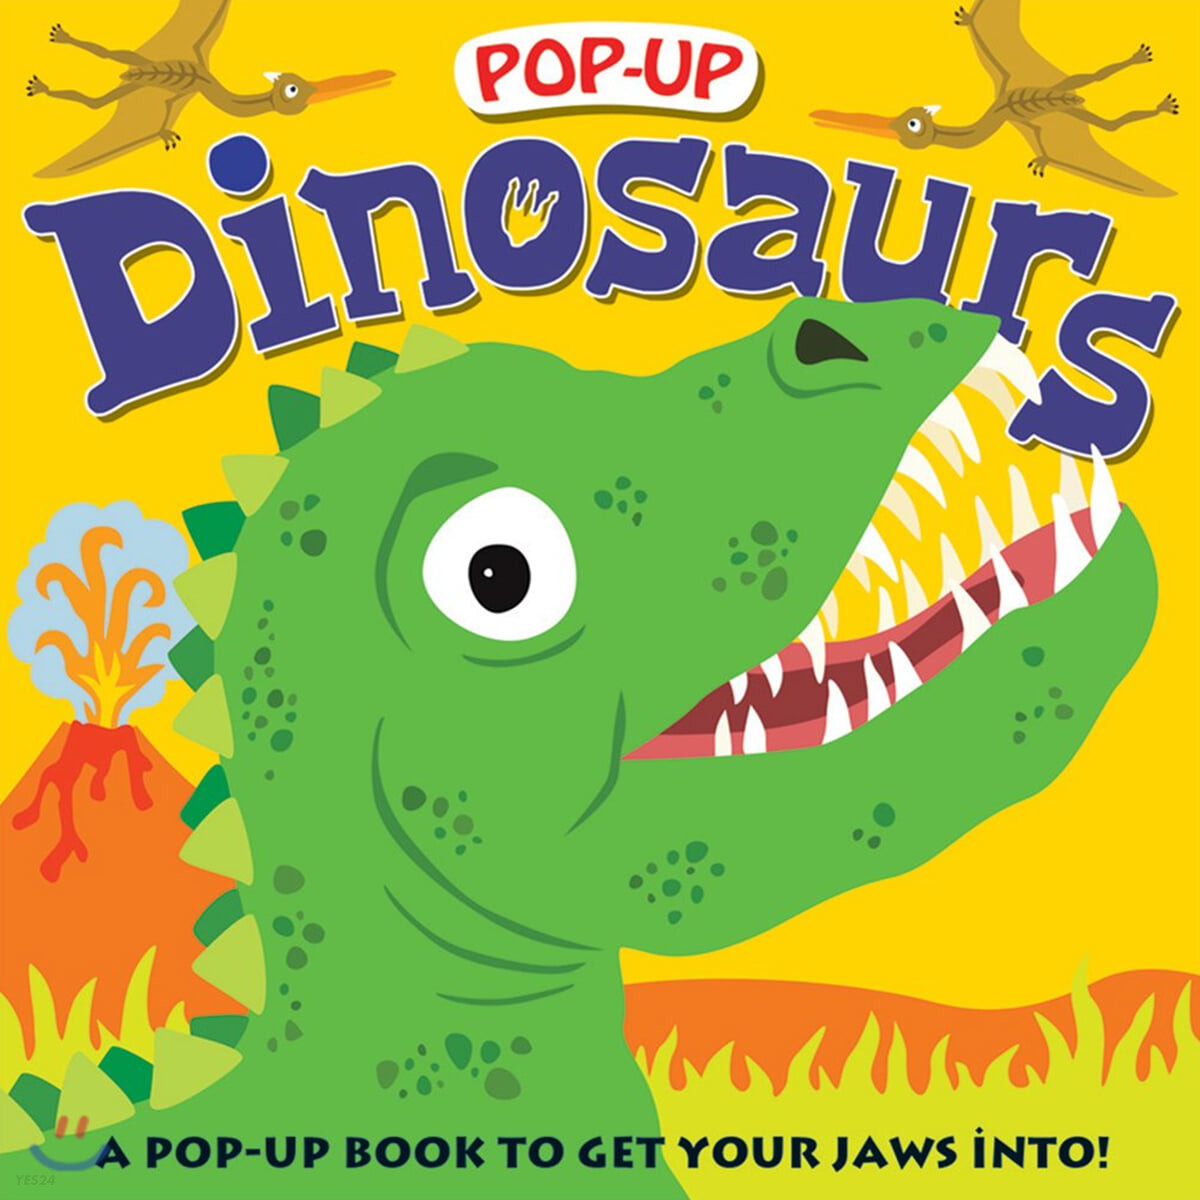 (Pop-up)dinosaurs: a pop-up book to get your jaws into!